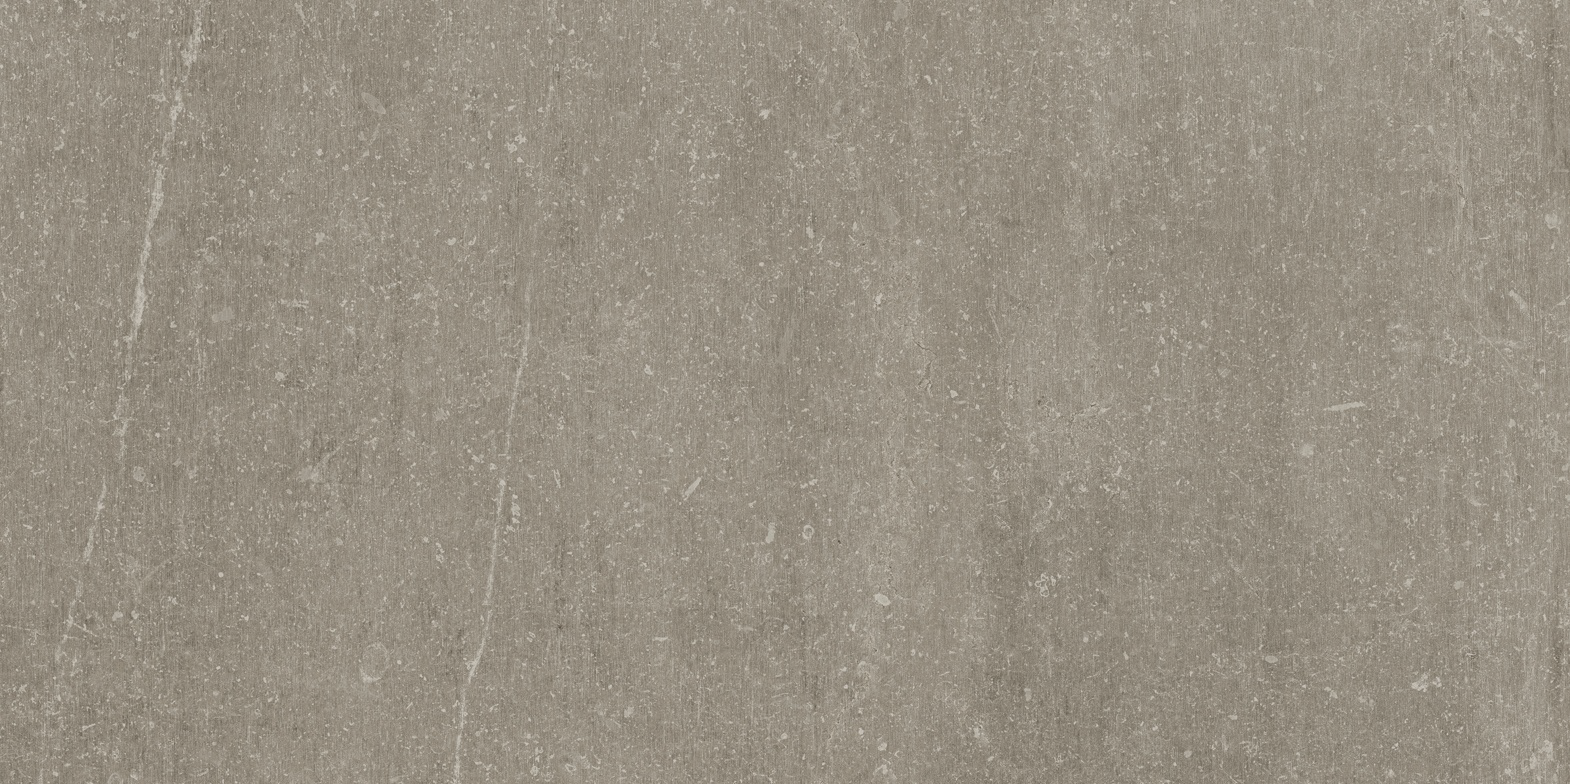 clay pattern glazed porcelain field tile from nexus anatolia collection distributed by surface group international matte finish pressed edge 12x24 rectangle shape